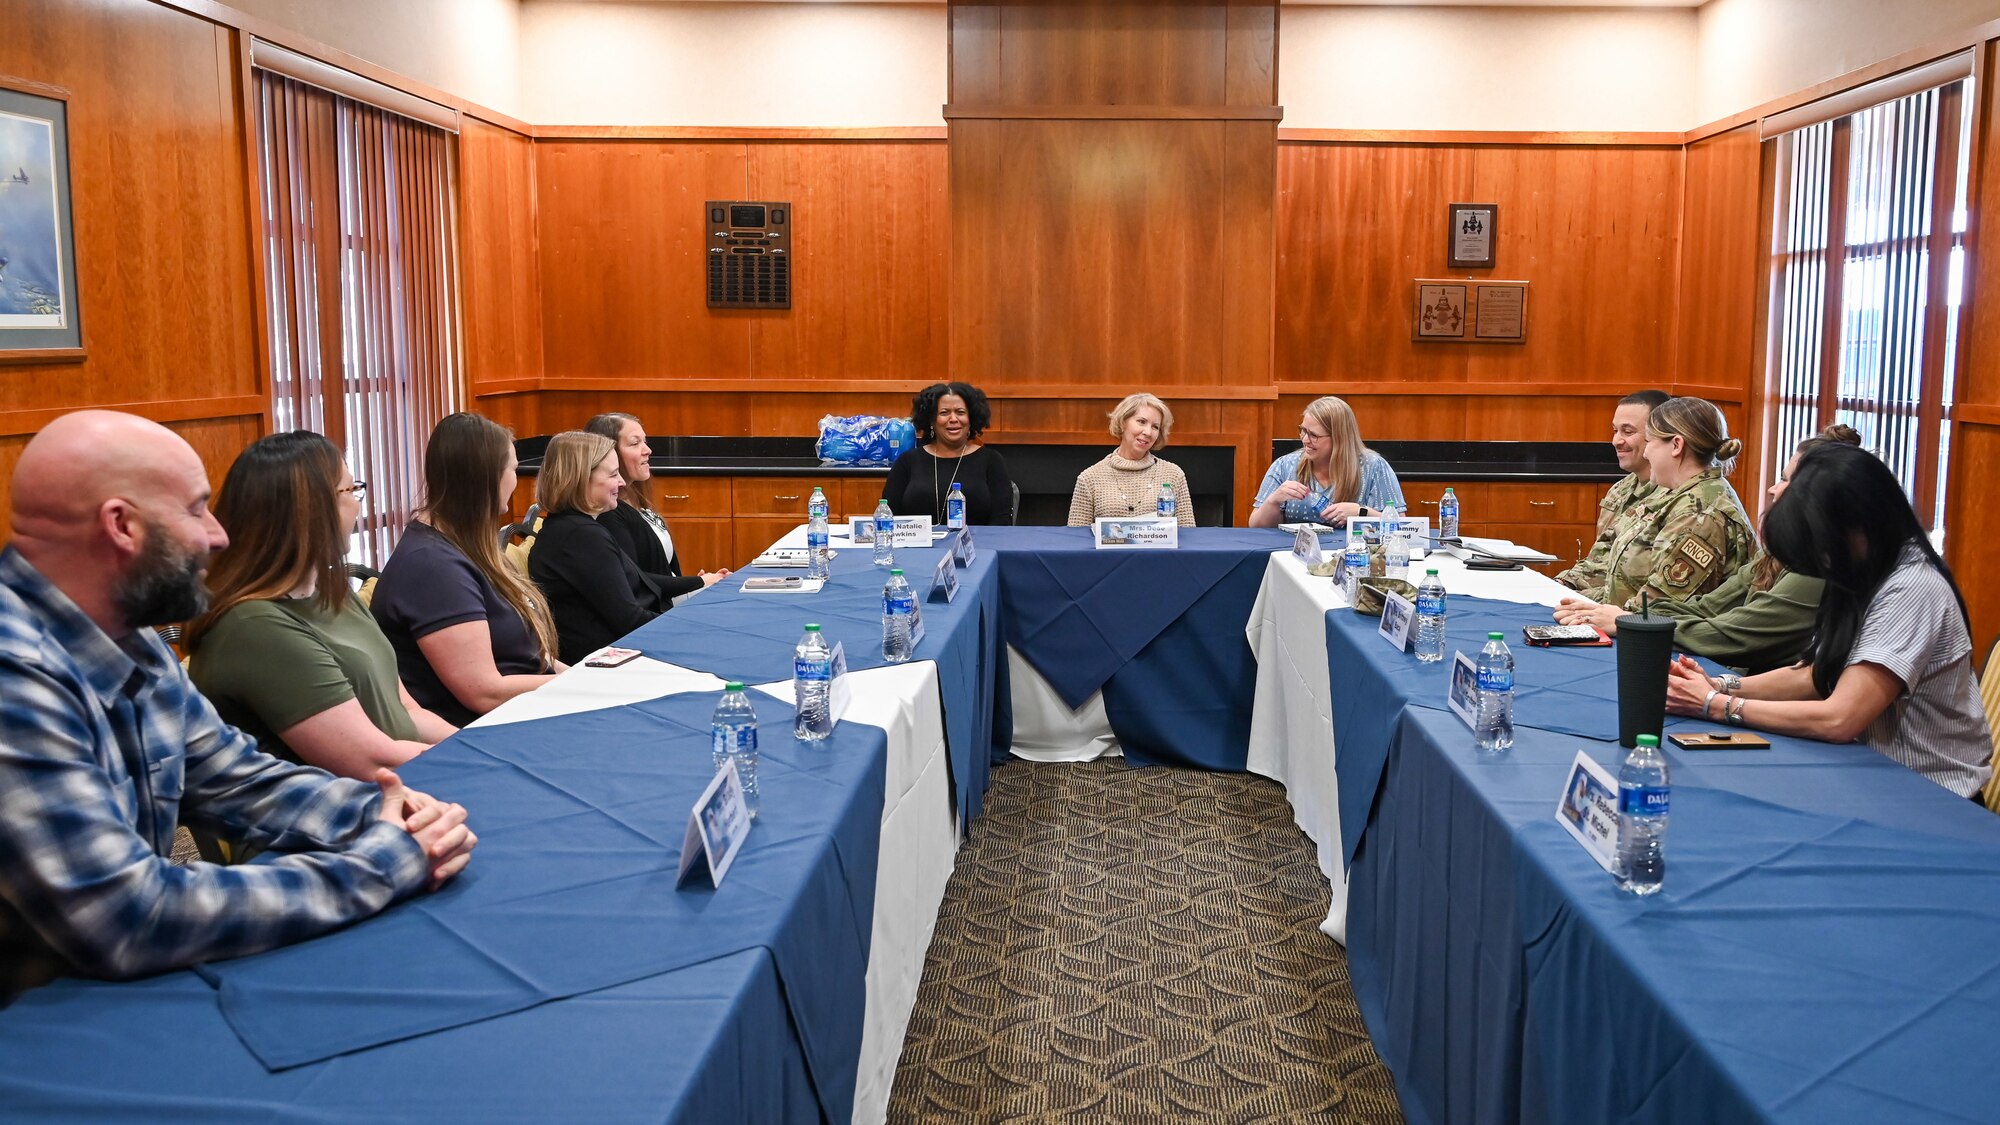 Center, Dede Richardson, spouse of Gen. Duke Z. Richardson, Air Force Materiel Command commander, meets with spouses of service members April 11, 2023, at Hill Air Force Base, Utah. During part of her visit to Hill AFB April 11-15, Richardson met with spouses to discuss ways she can advocate for them.